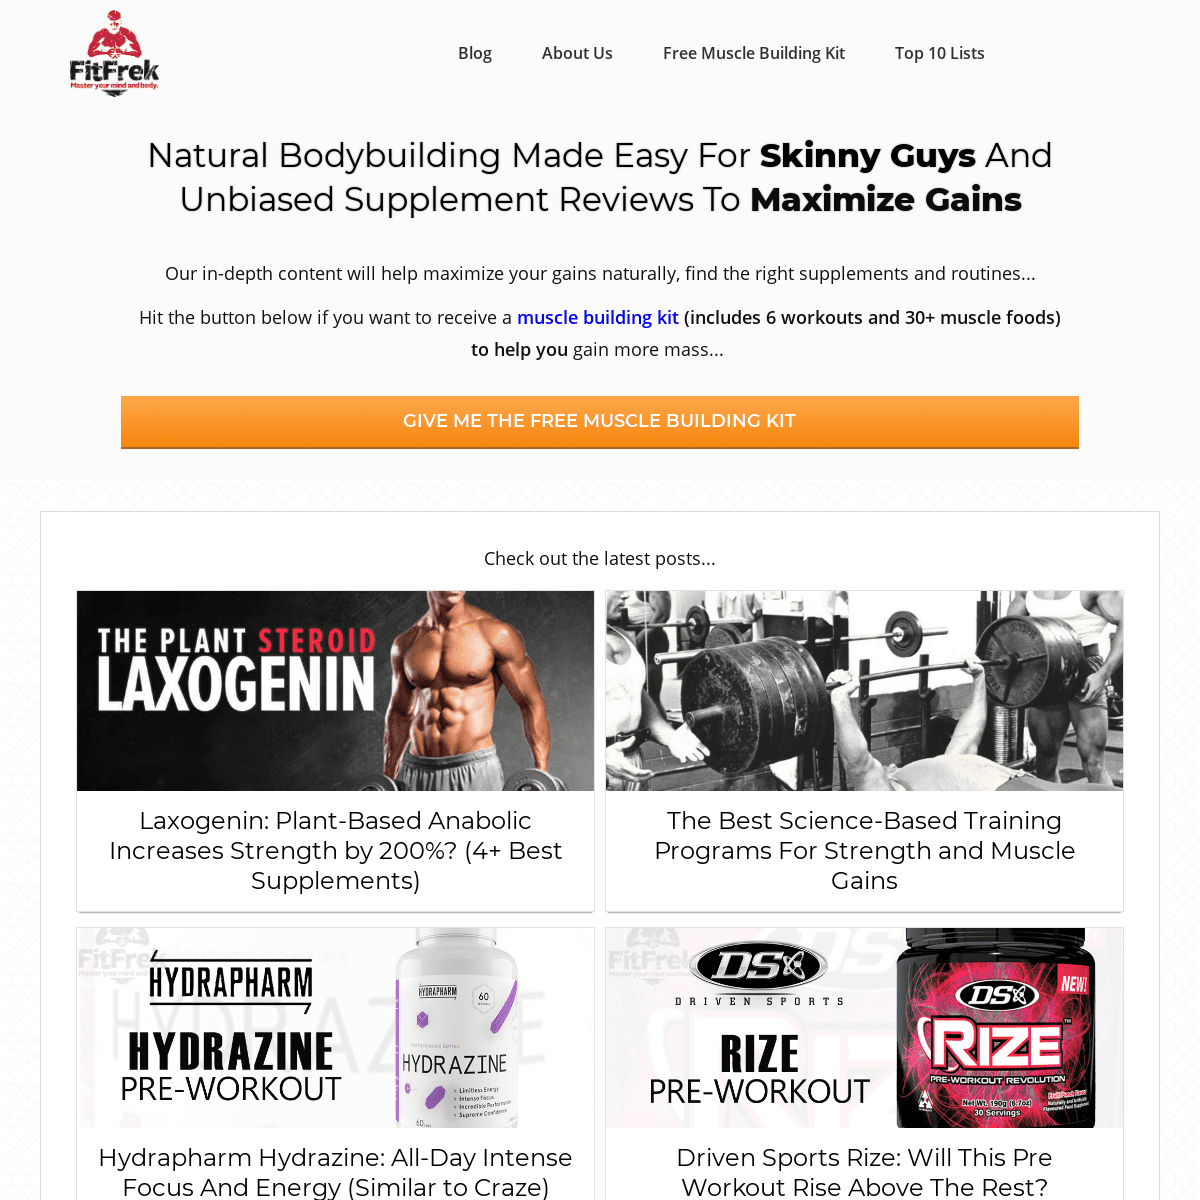 FitFrek: Bodybuilding for Skinny Guys and Unbiased Supplement Reviews